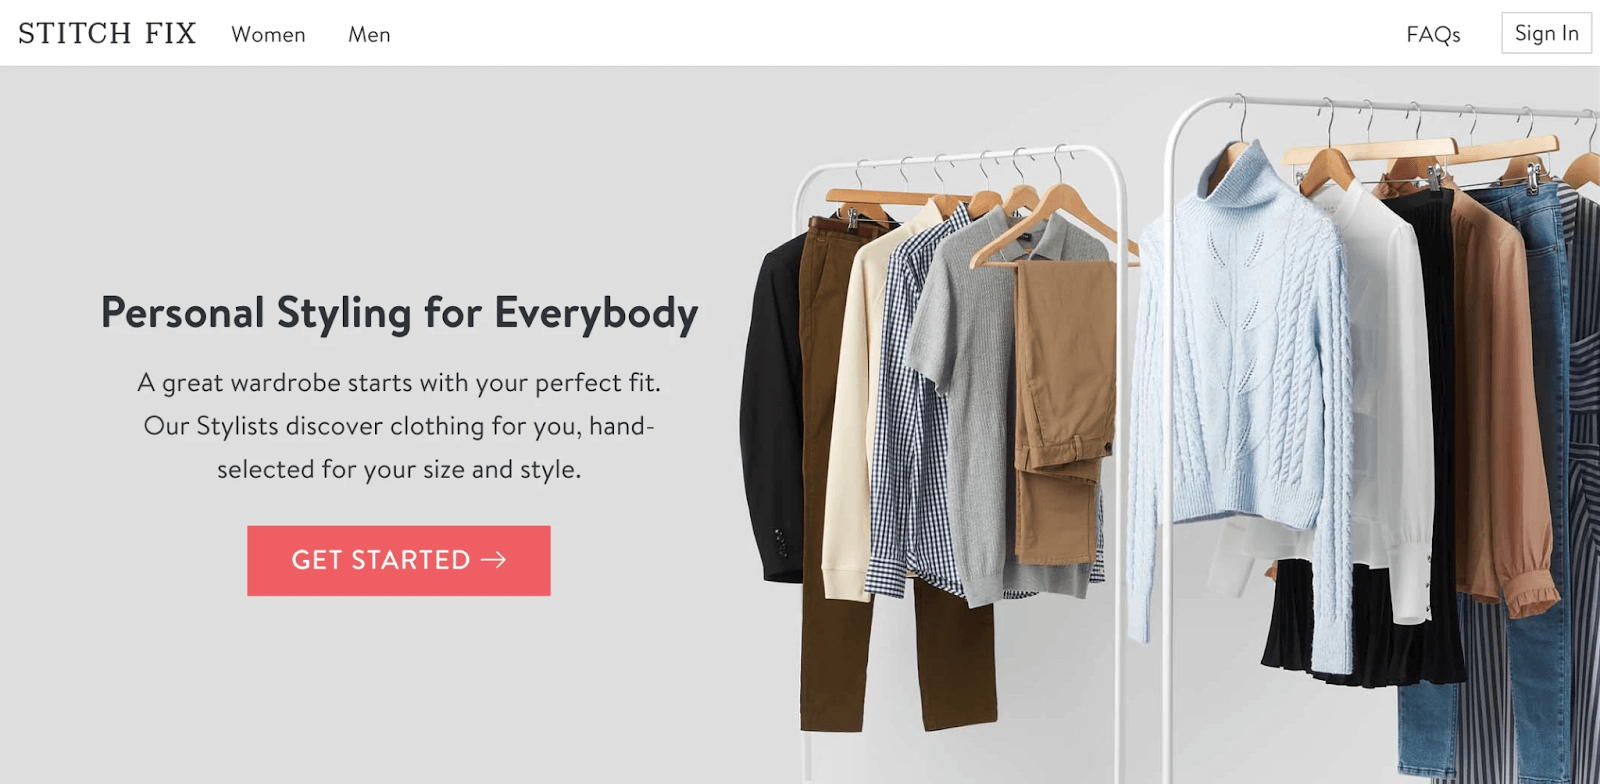 StitchFix provides a personalized shopping experience for a great customer experience